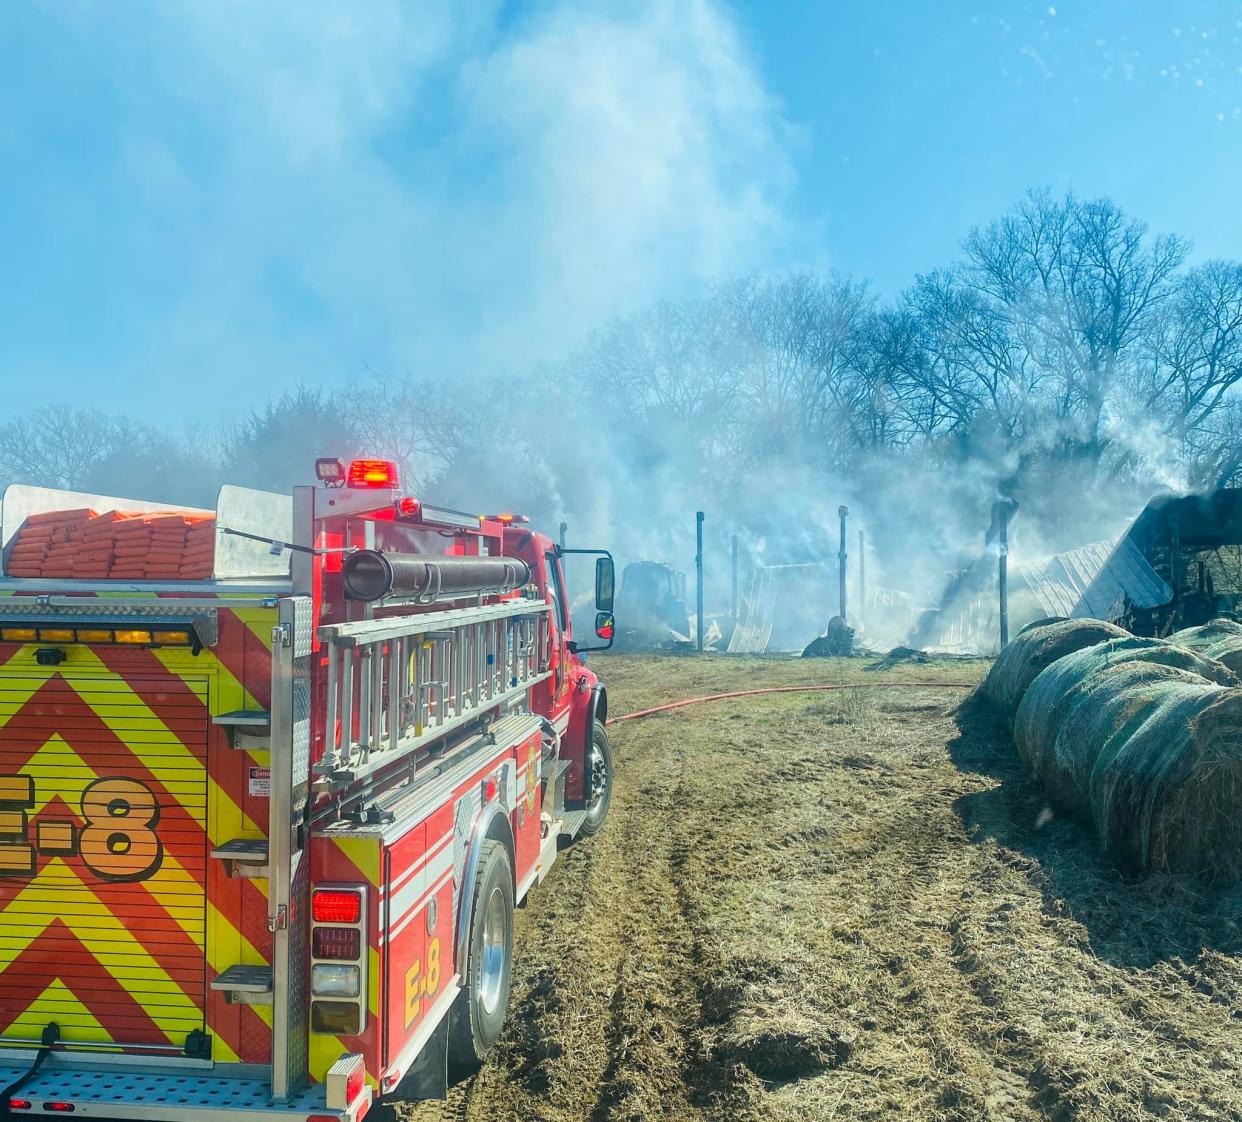 About 50% a traditional barn in Williamsport was involved in a fire when the responders with the Maury County Fire Departmet arrived on scene Sunday, Jan. 30, 2022.